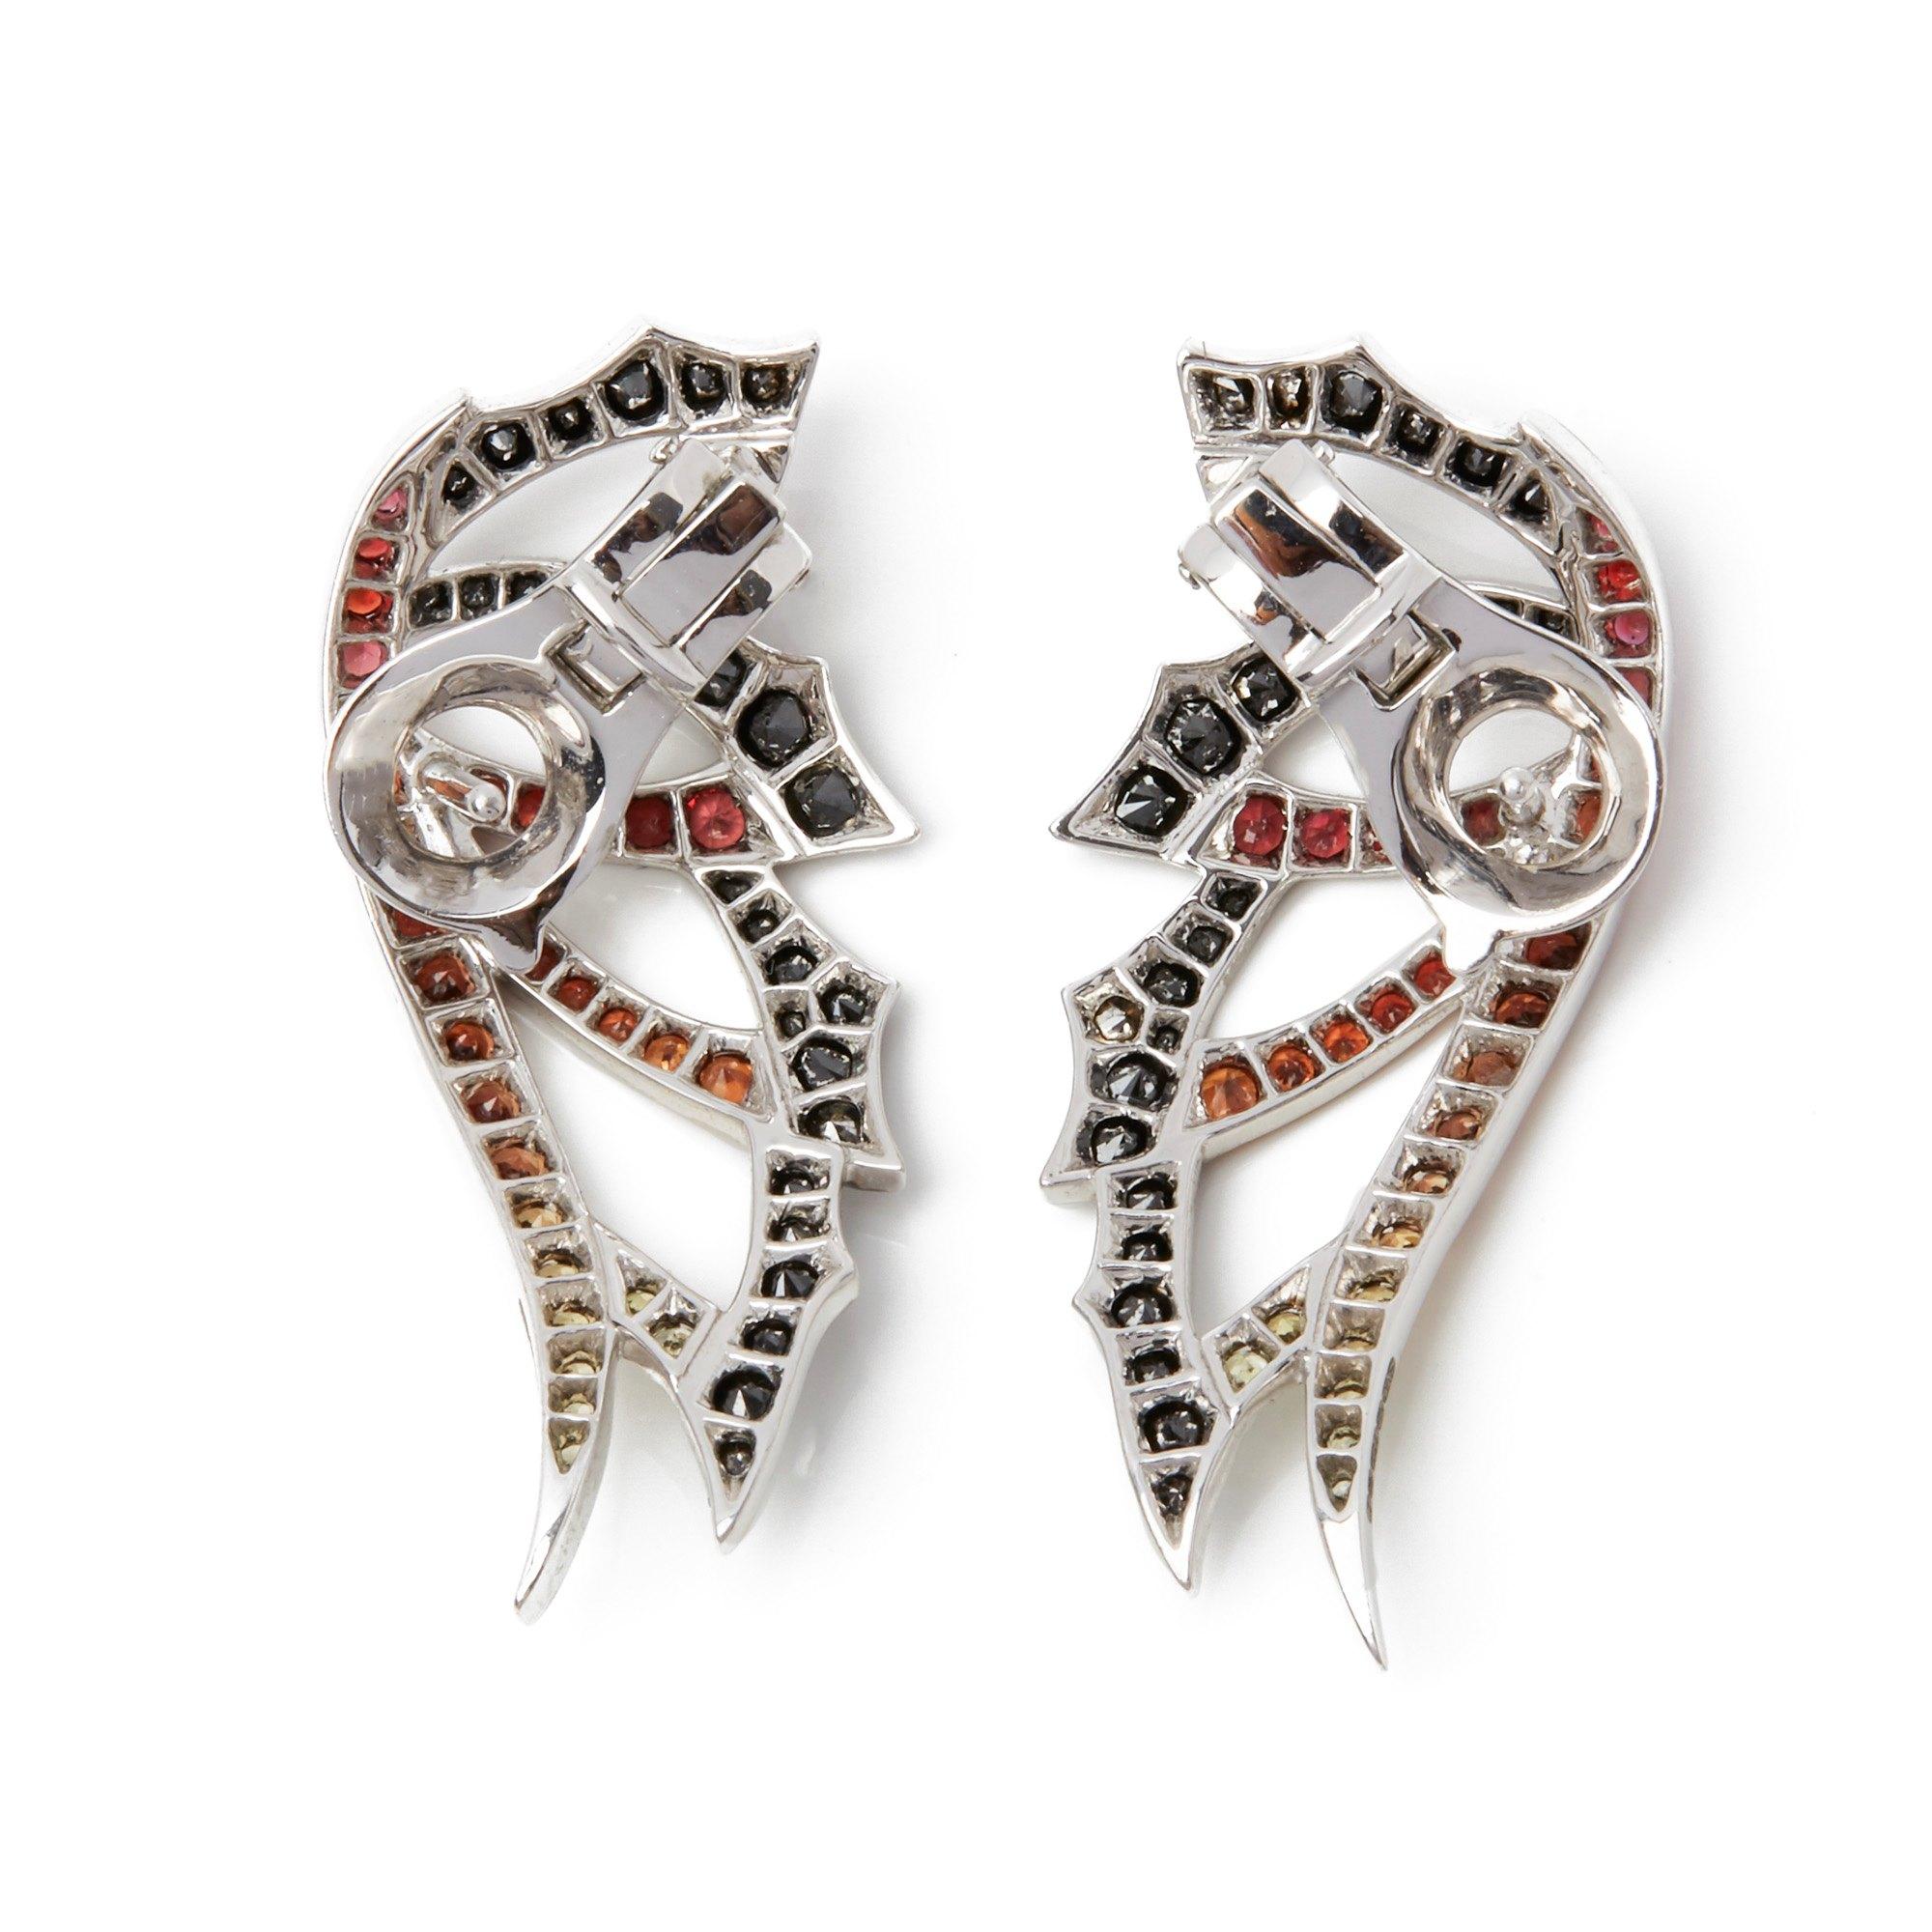 These earrings by Stephen Webster are from his Magnipheasant collection and feature a mix of graduated orange and yellow sapphires along with black diamonds. Set in 18k white gold and with a post and omega back fitting. Complete with Xupes